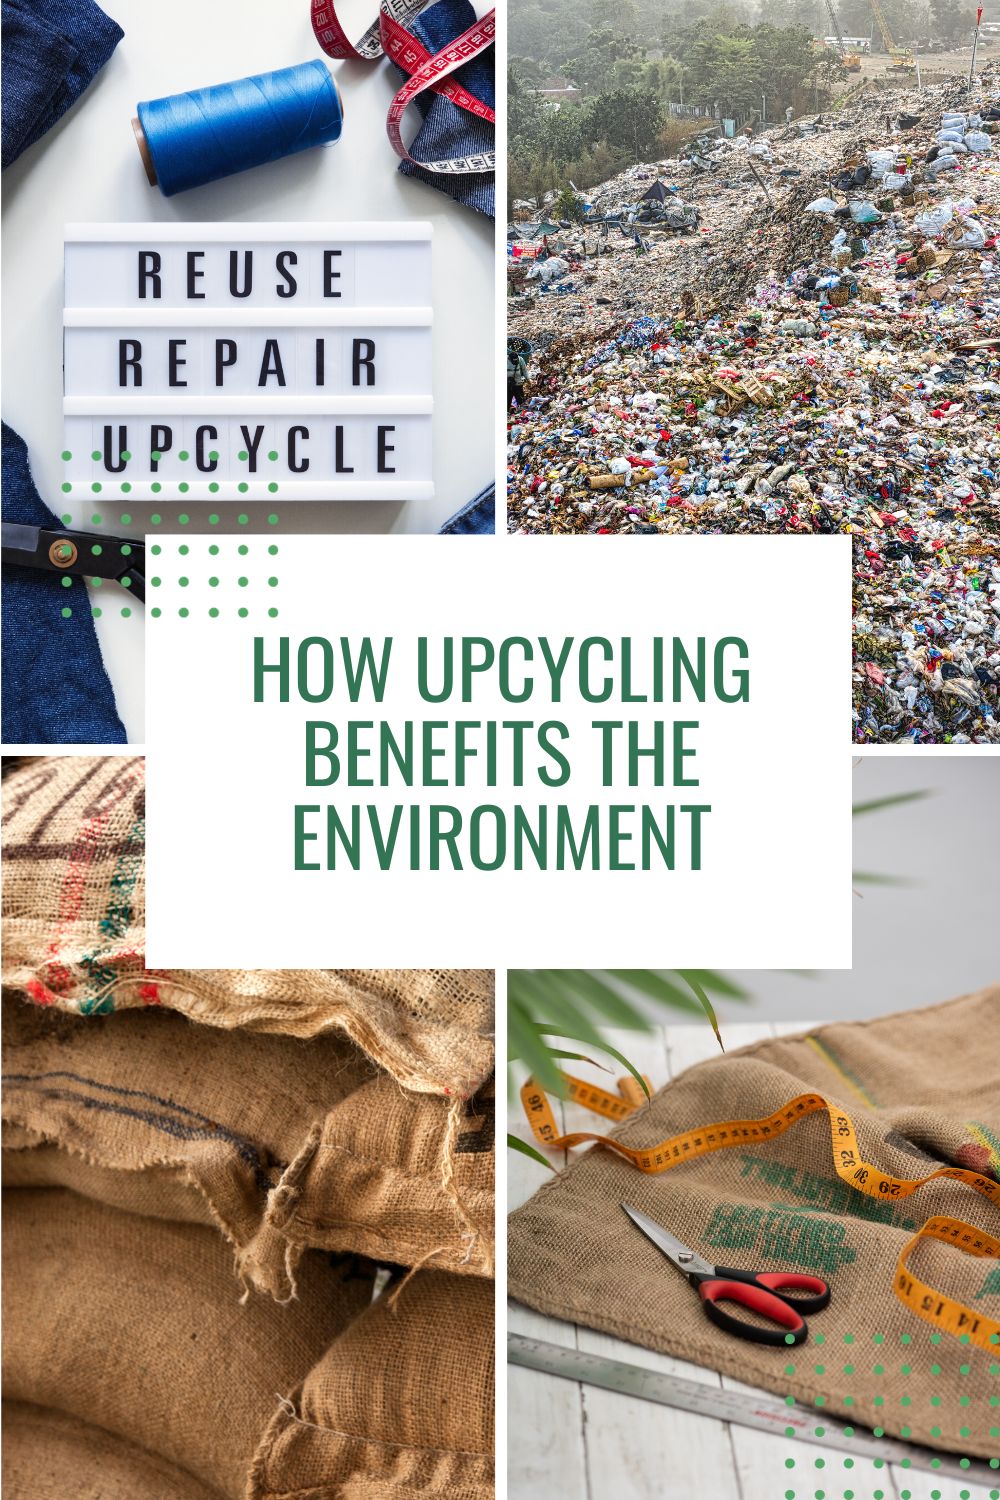 How Upcycling Benefits the Environment